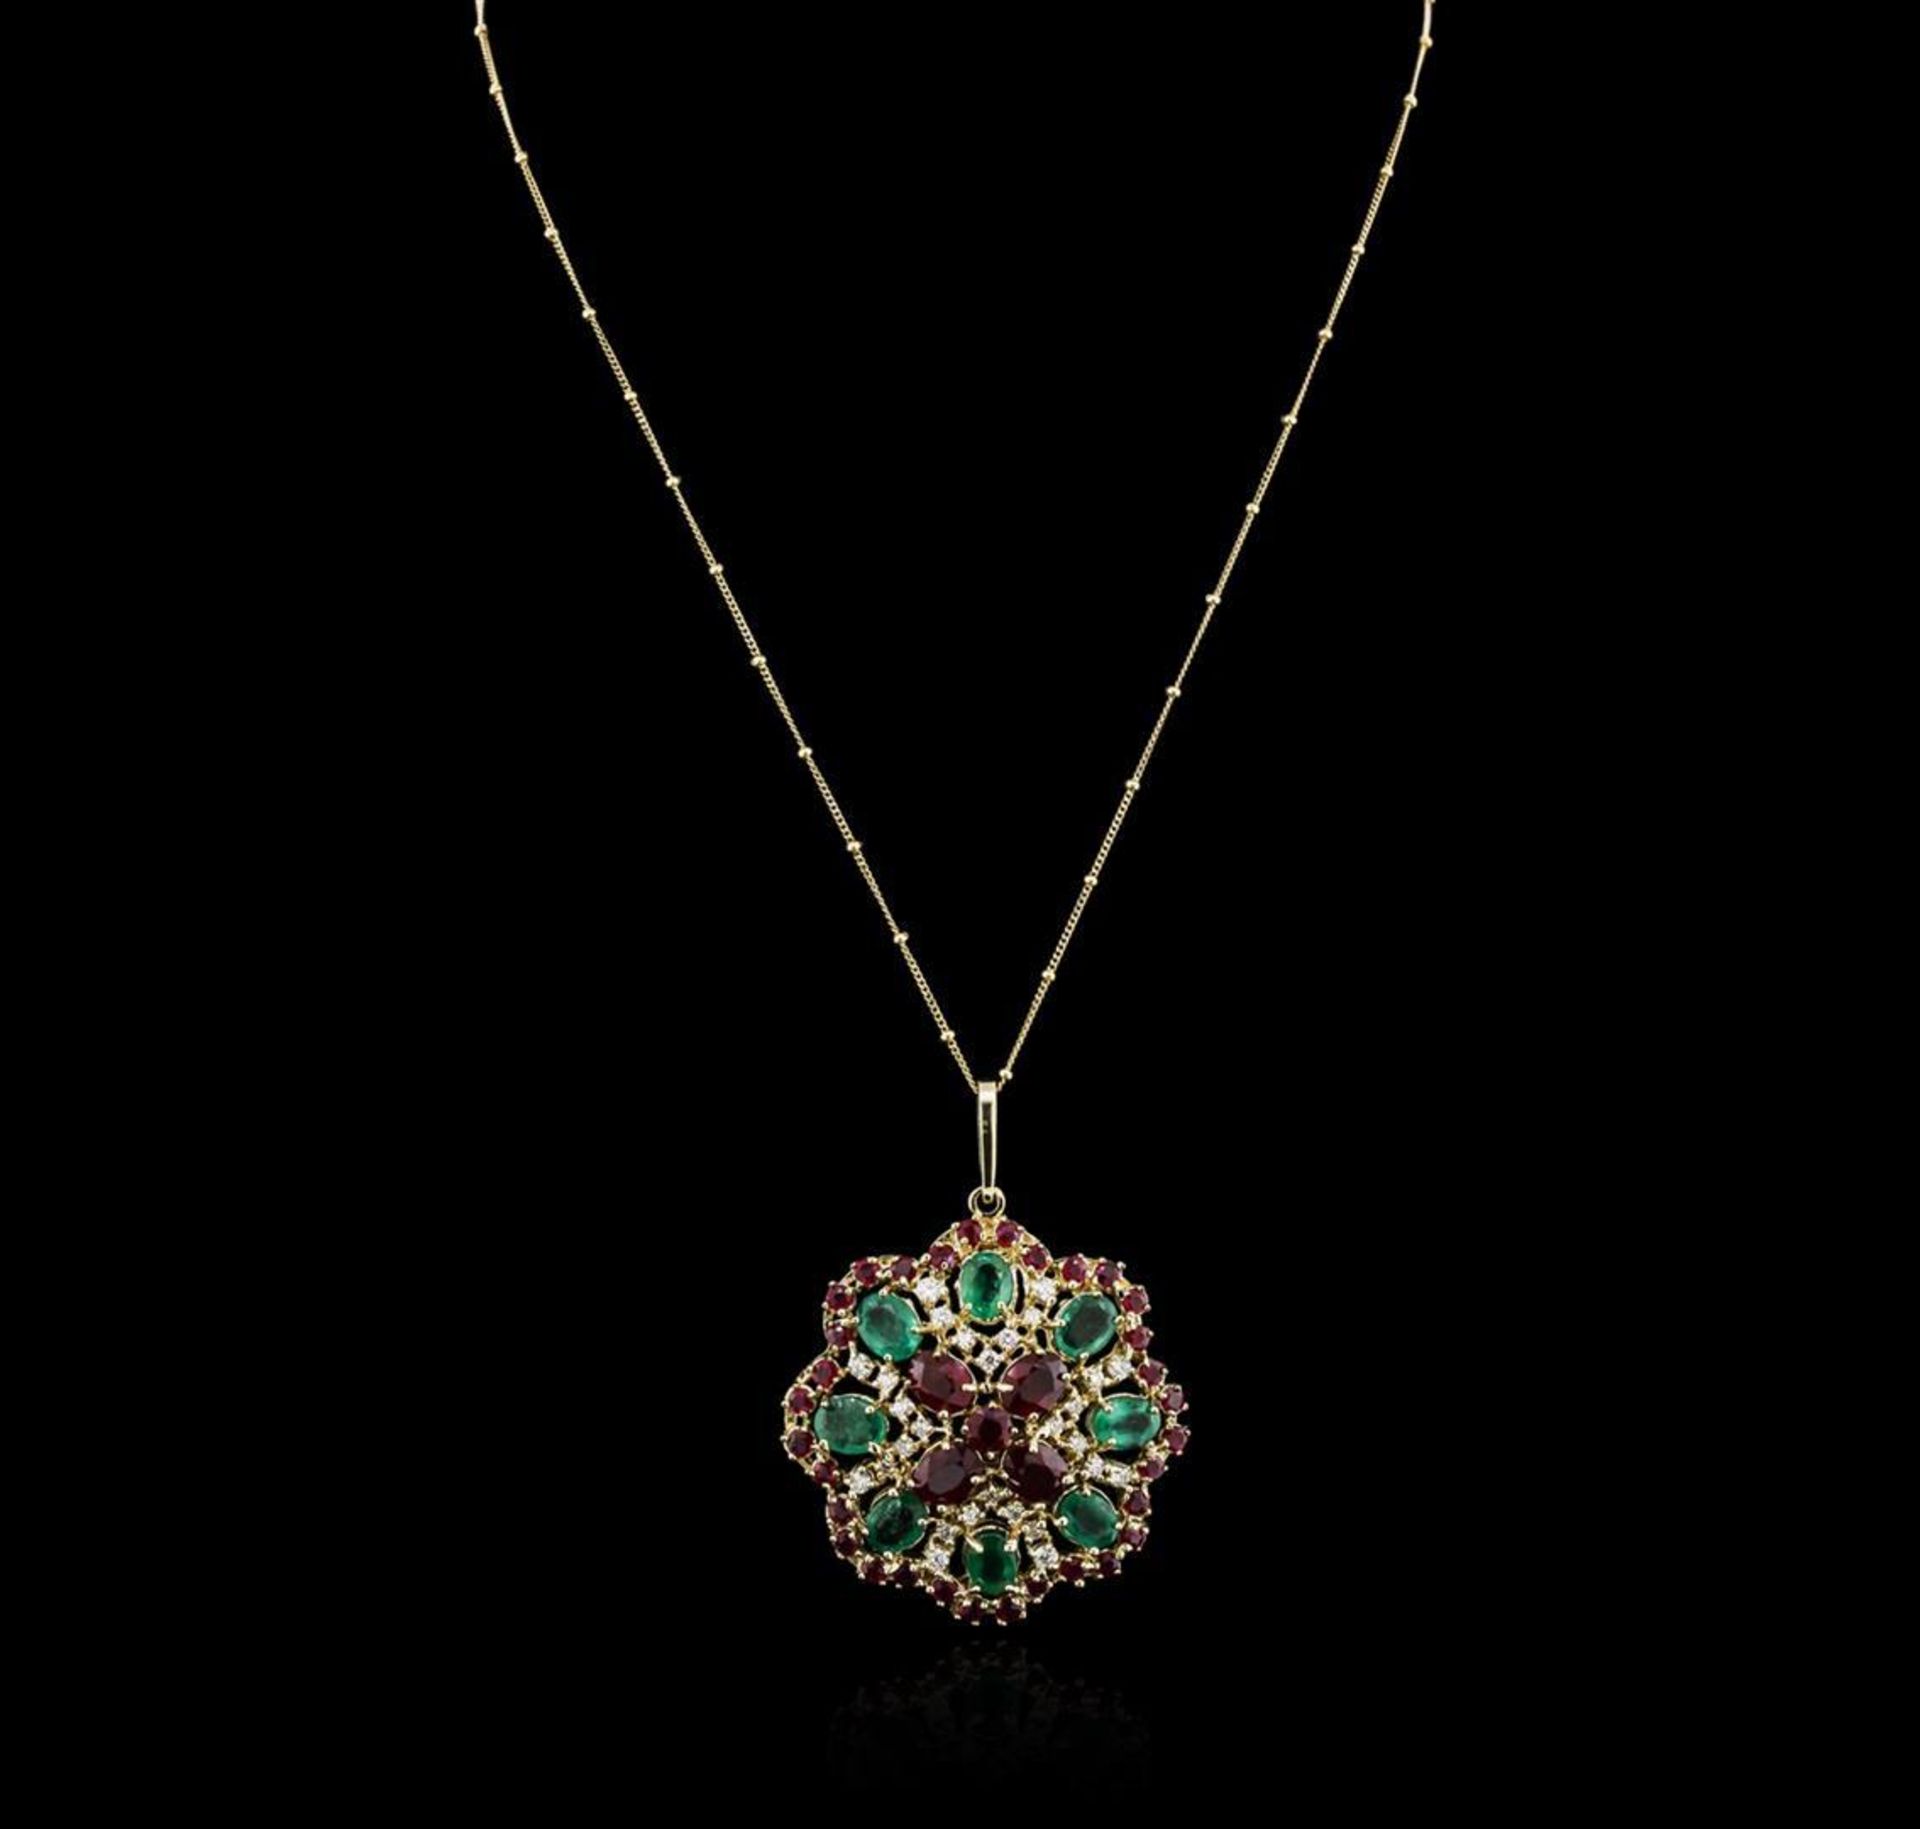 14KT Yellow Gold 11.78 ctw Ruby, Emerald and Diamond Pendant With Chain - Image 2 of 3